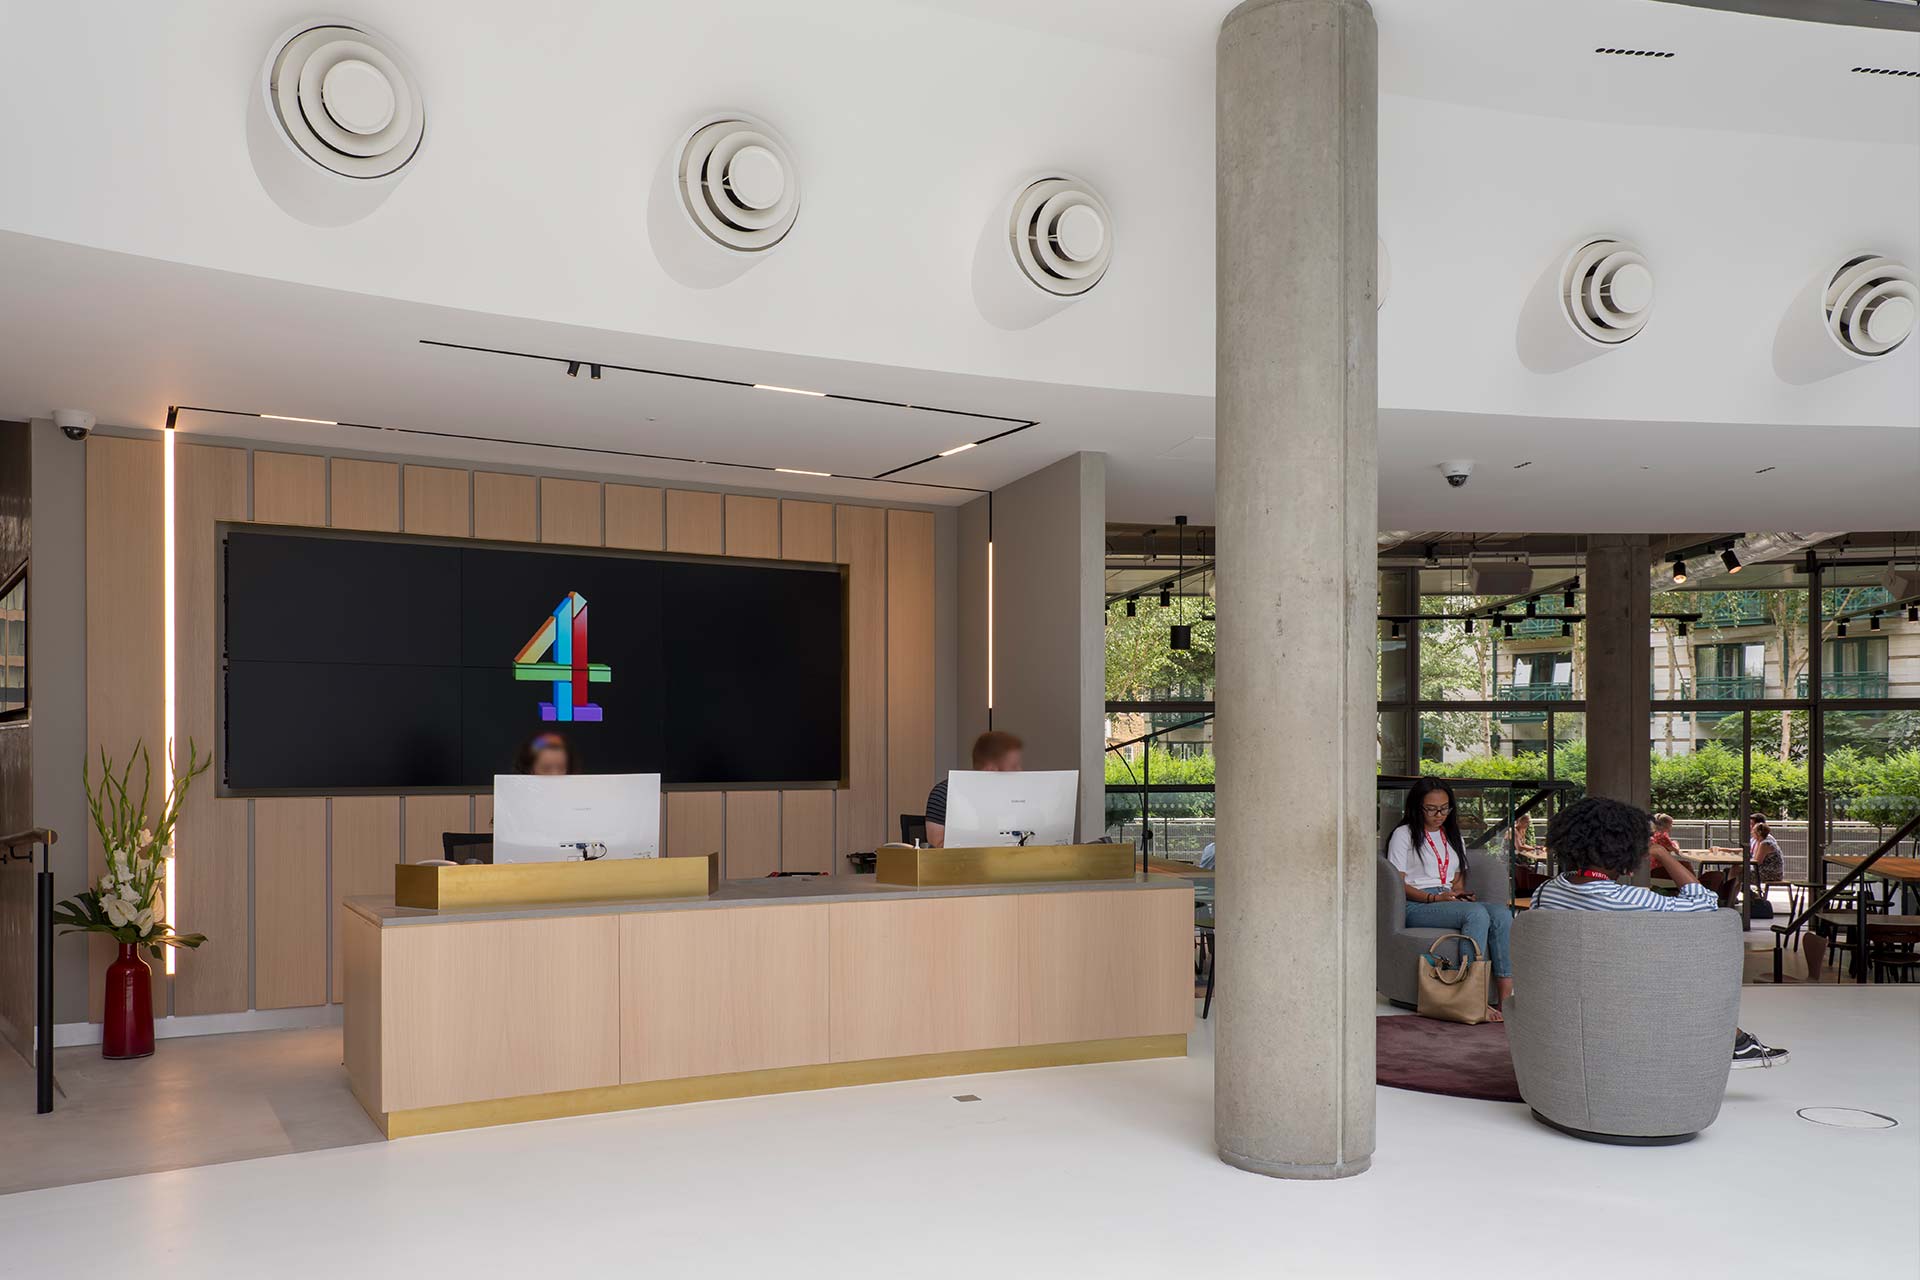 Channel 4 | 124-126 Horseferry Road